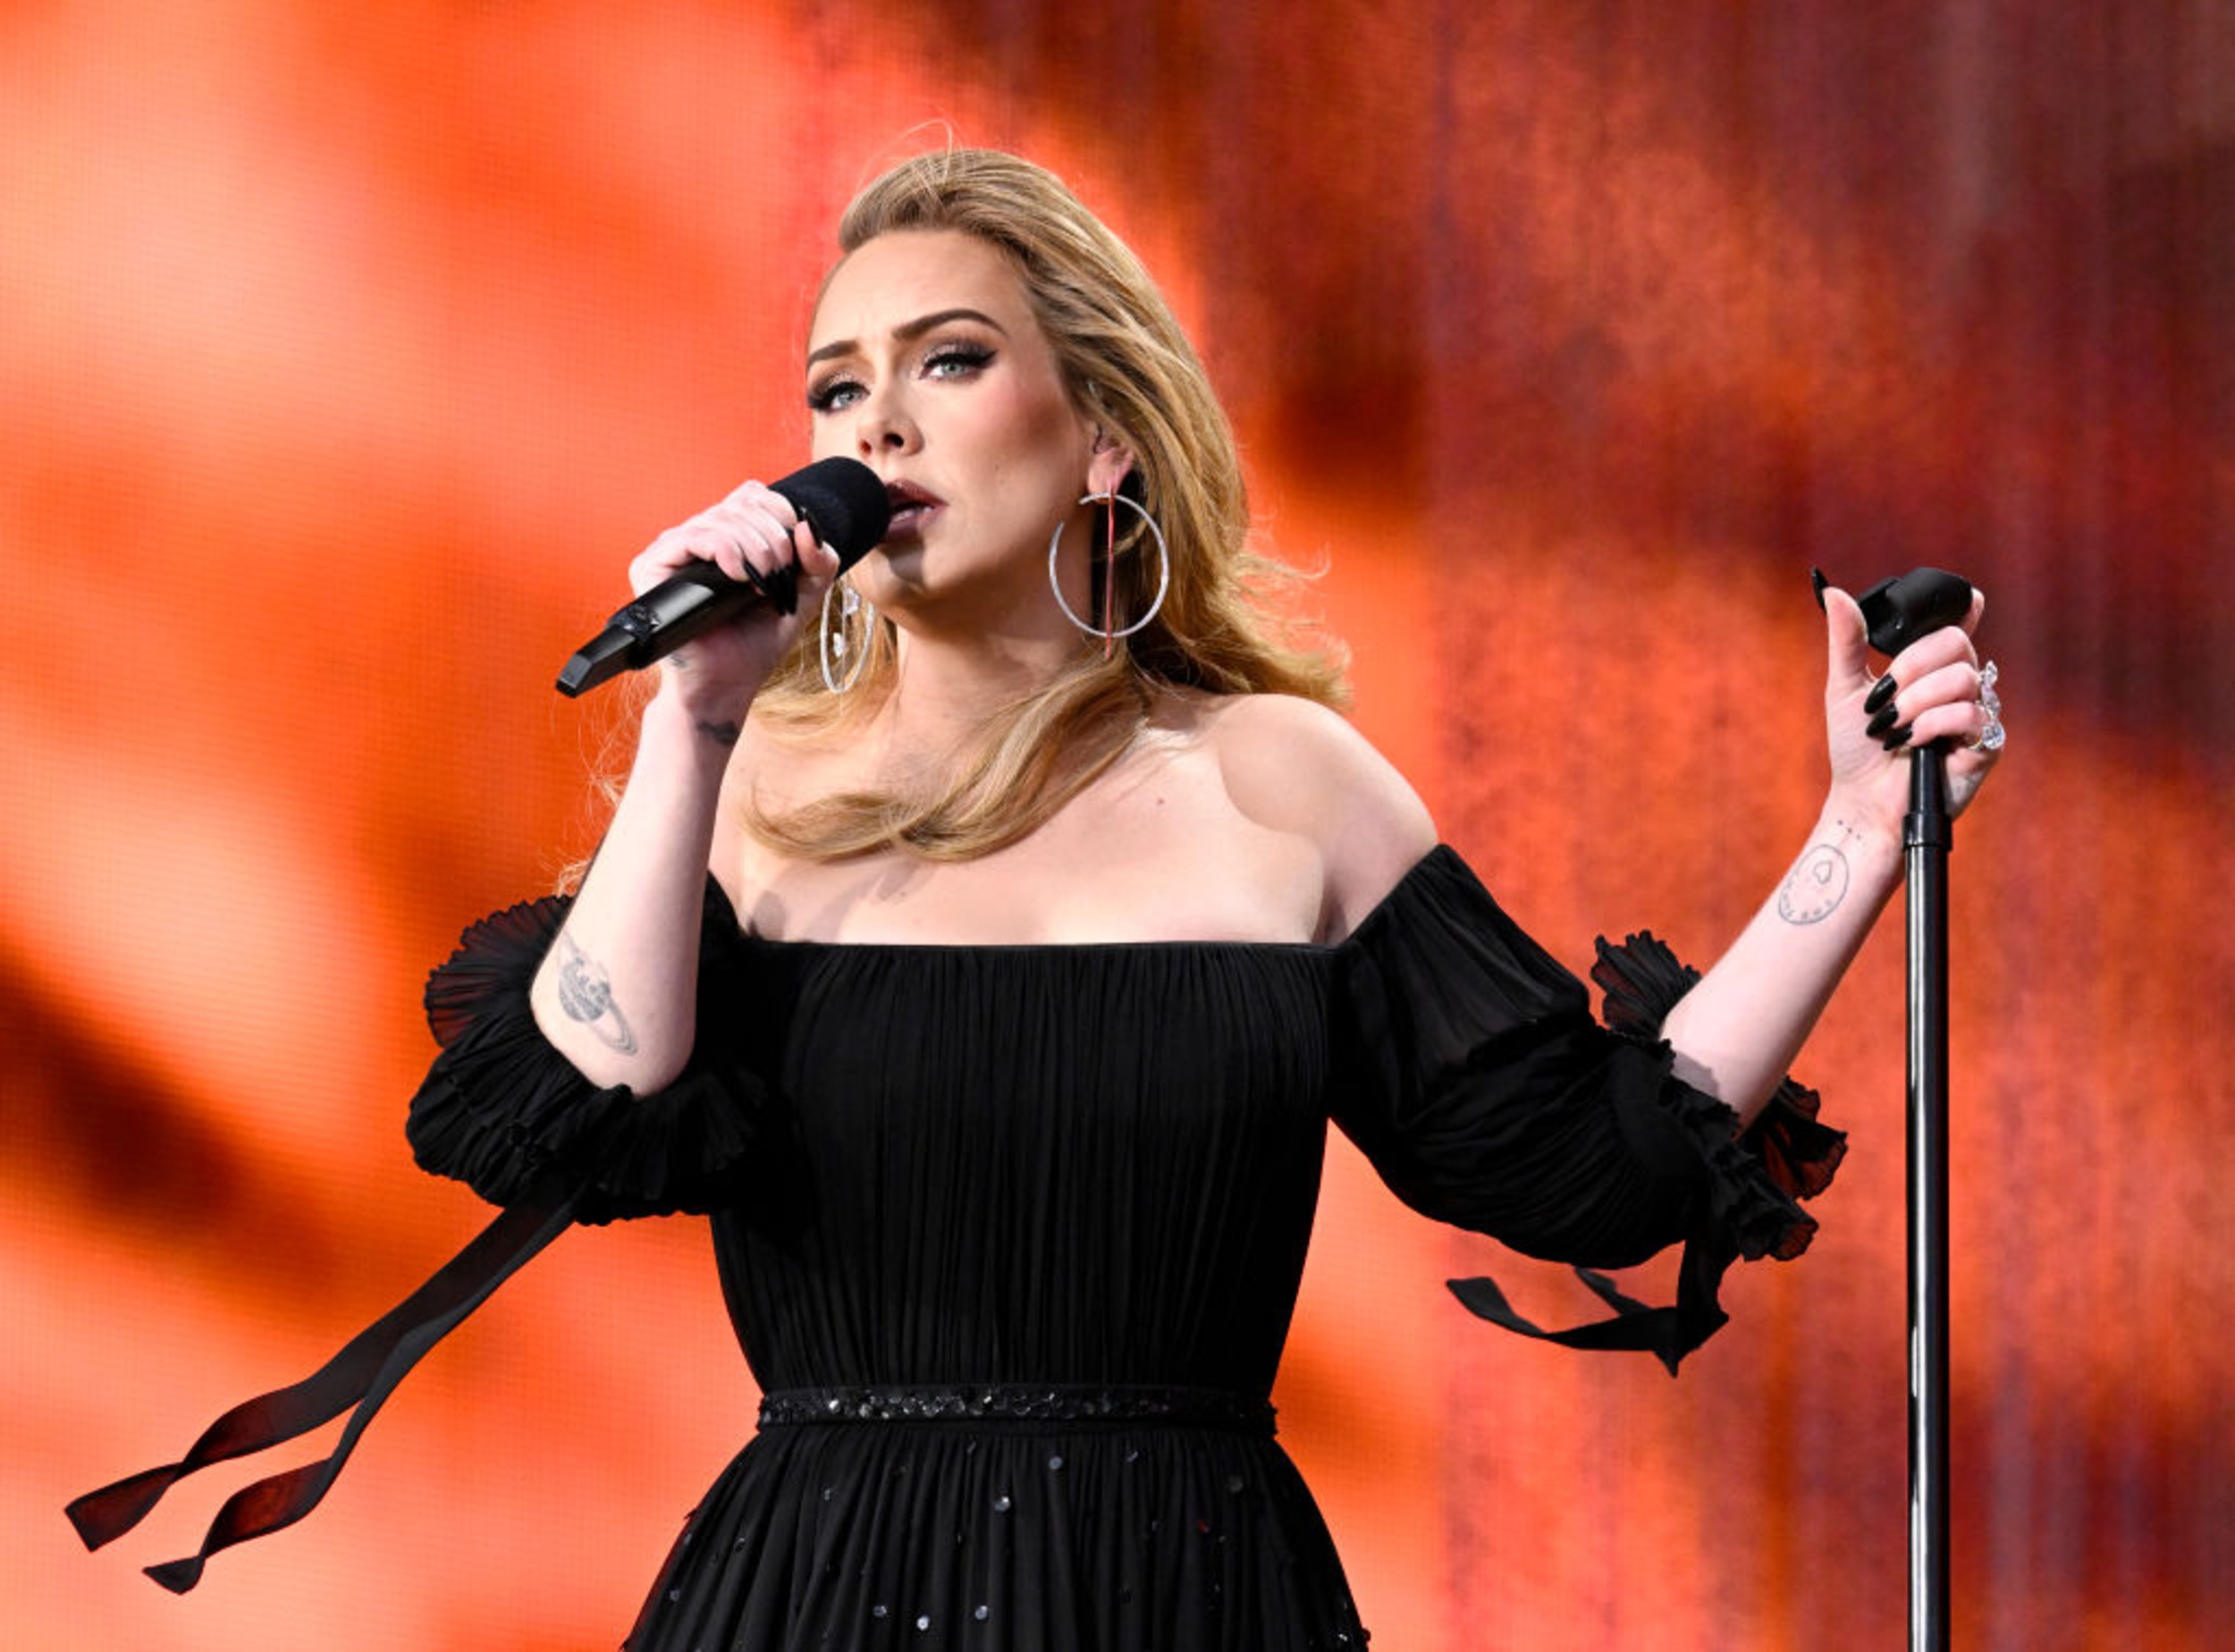 <p>Adele’s Las Vegas residency began back in late 2022, and her final shows in Sin City will end this year. Although tickets on Ticketmaster for her shows are currently sold out, fans can still snag tickets on secondary platforms like Vivid Seats and StubHub. The "Weekends with Adele" residency will have its final show on June 15th. </p><p>You may also like: <a href='https://www.yardbarker.com/entertainment/articles/the_essential_outlaw_country_playlist_032524/s1__37337887'>The essential outlaw country playlist</a></p>